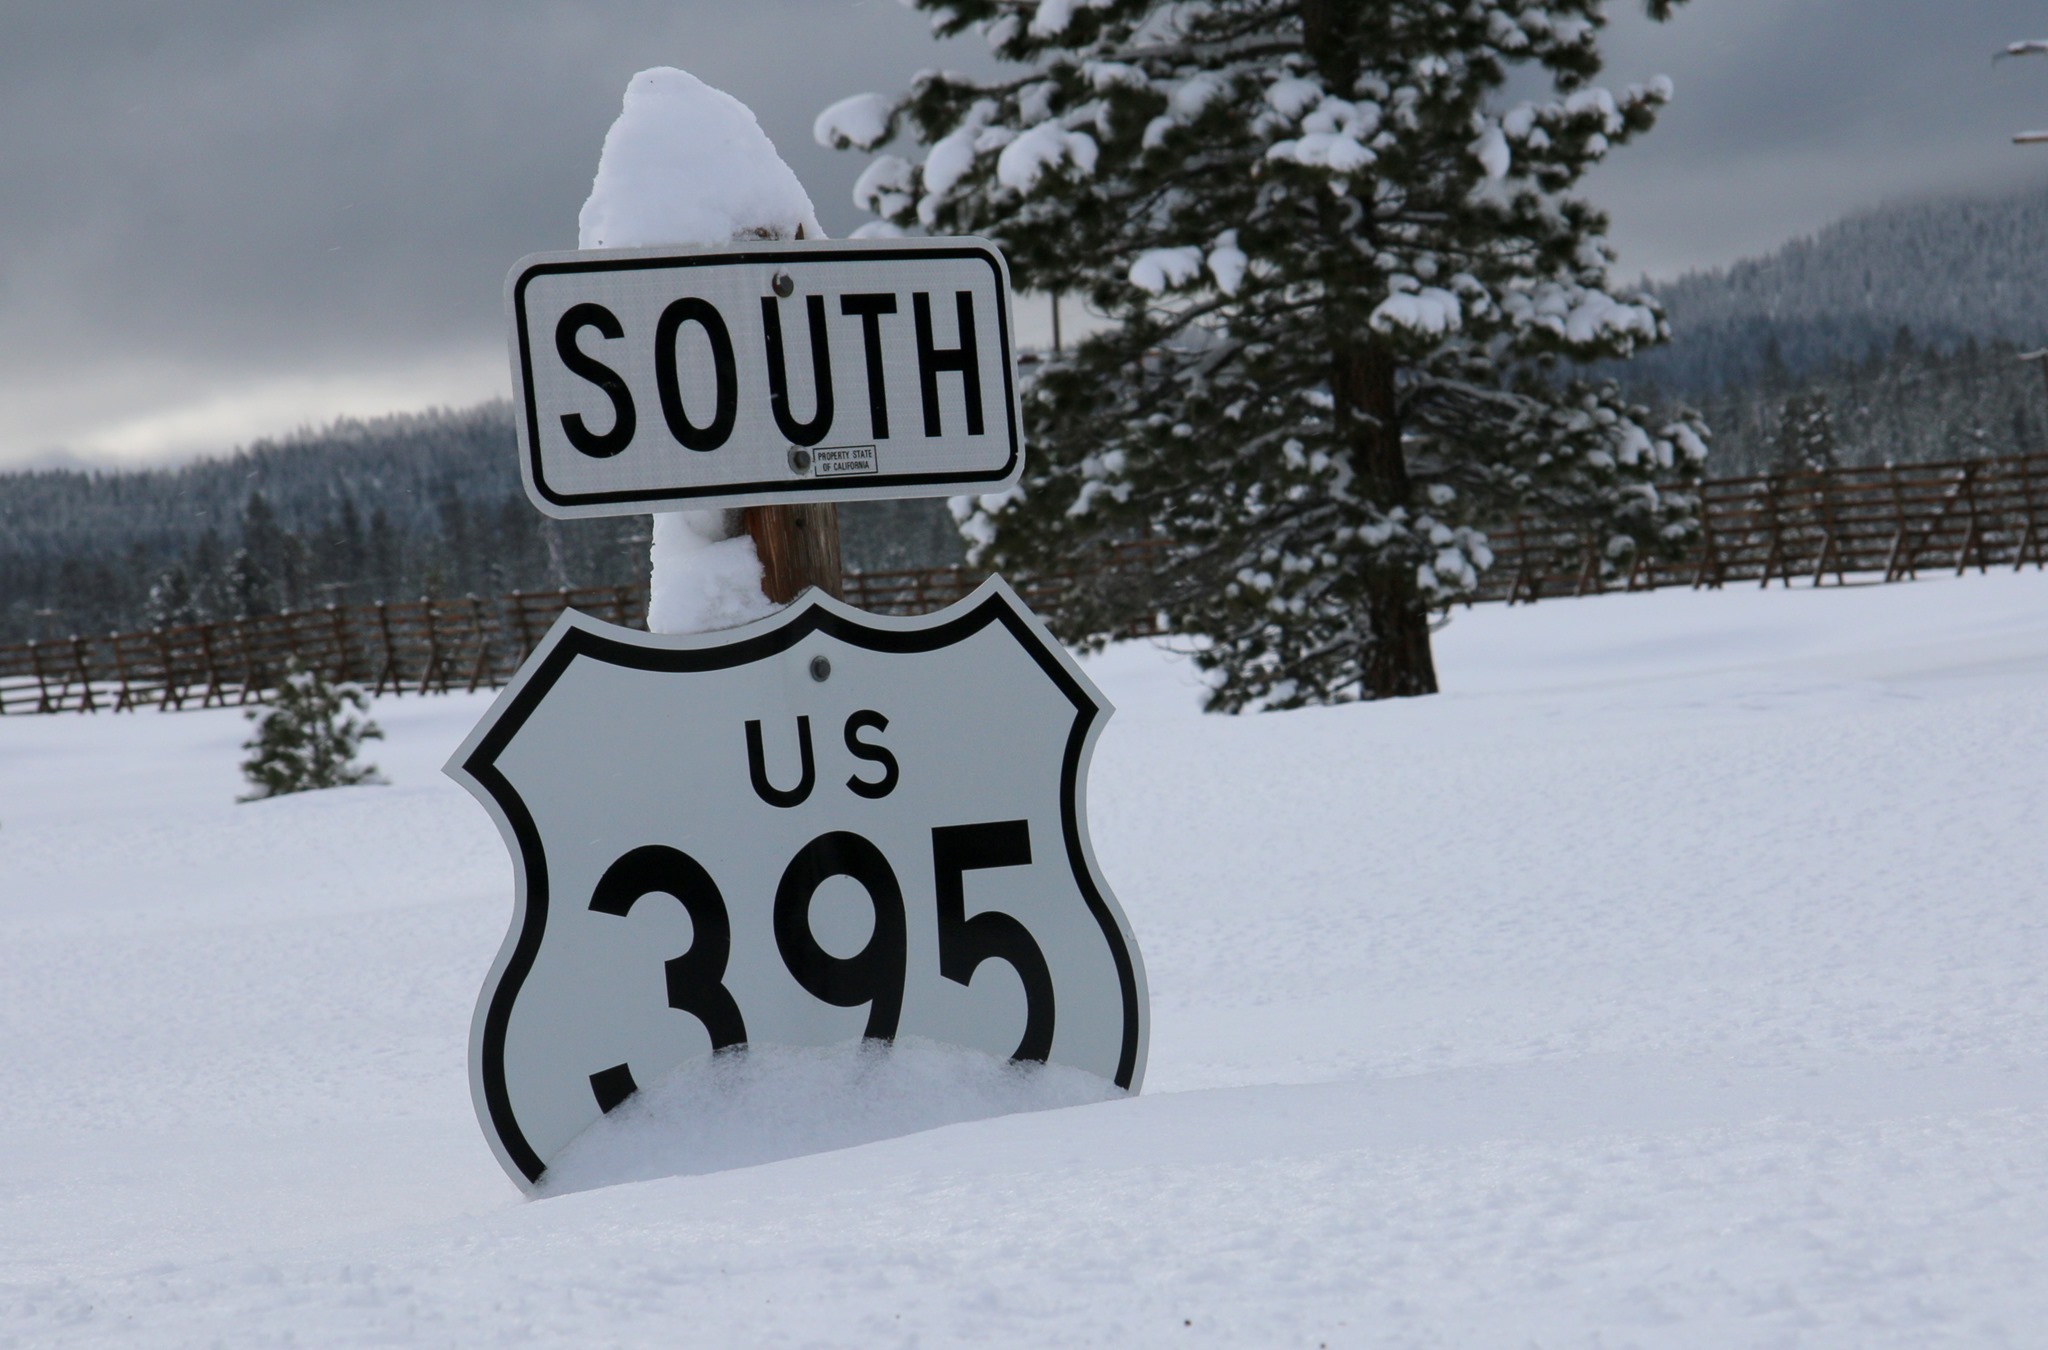 Compter avec des images - Page 21 395-hwy-sign-buried-in-snow